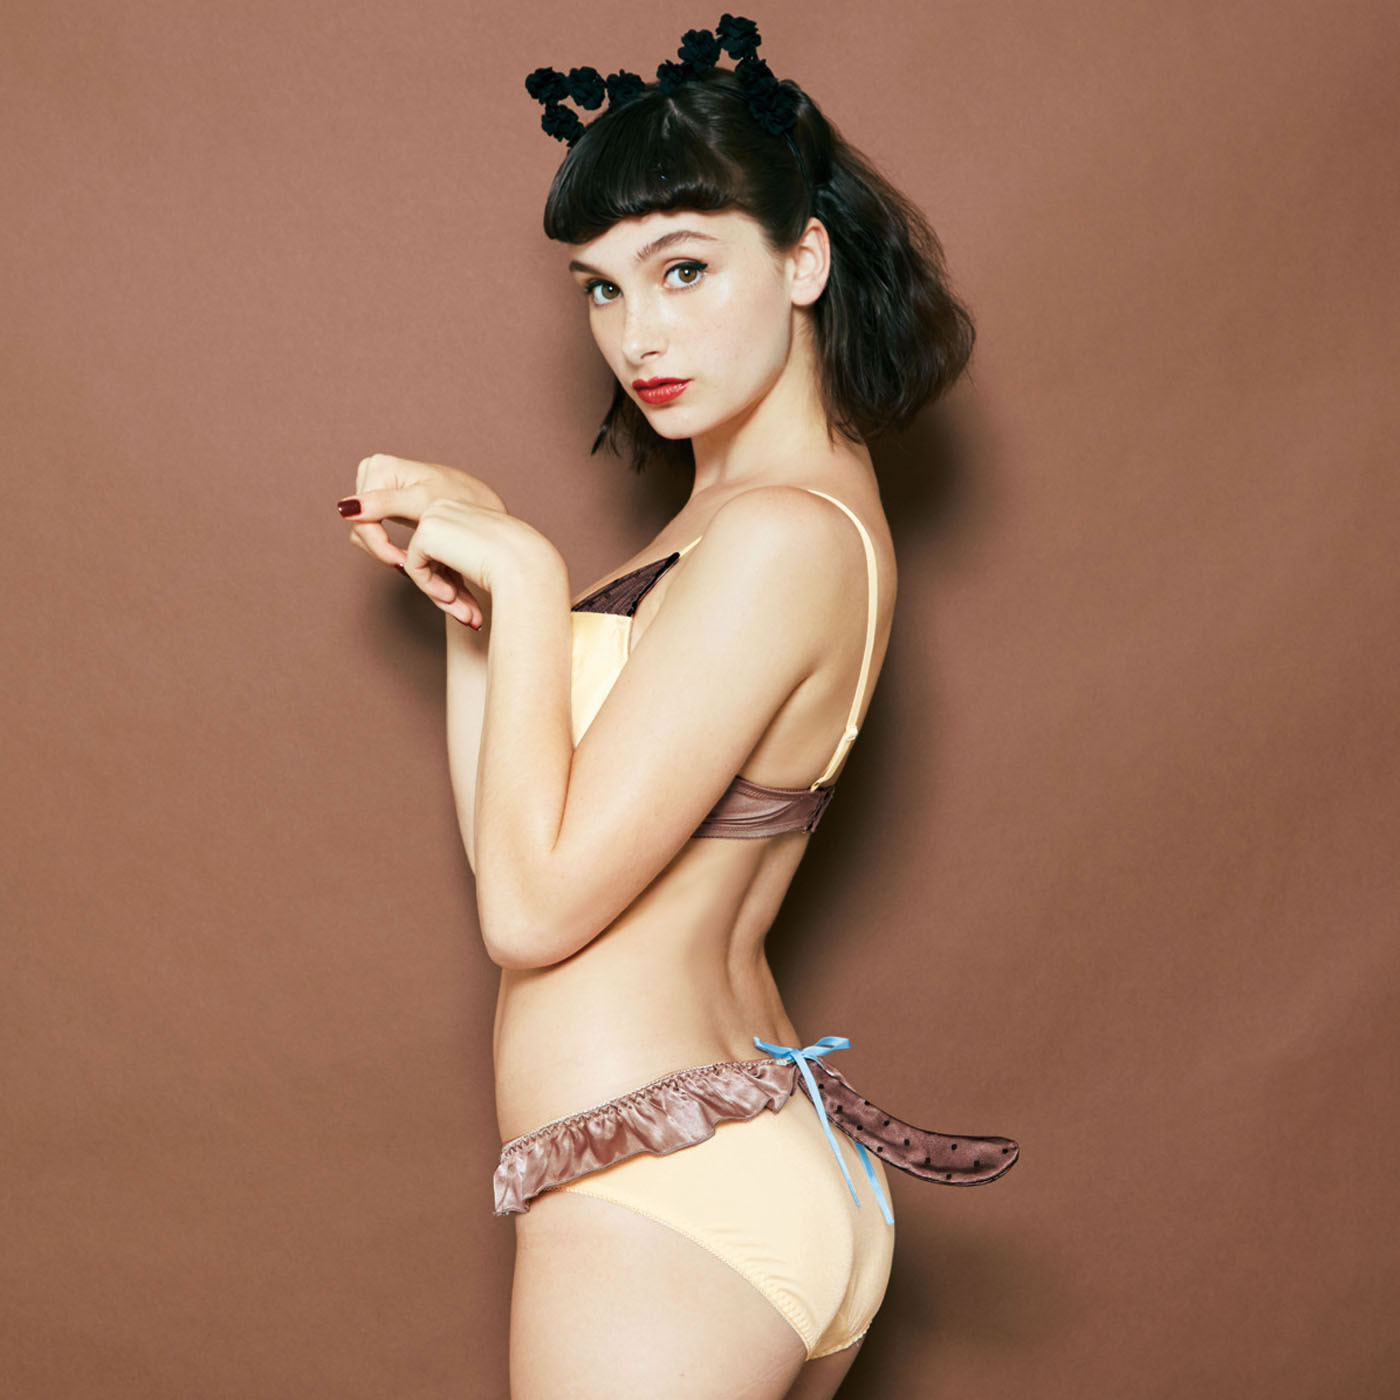 This Cat Lingerie is Purr-fect! Cat Lovers, Spice Up Your Nine Lives!